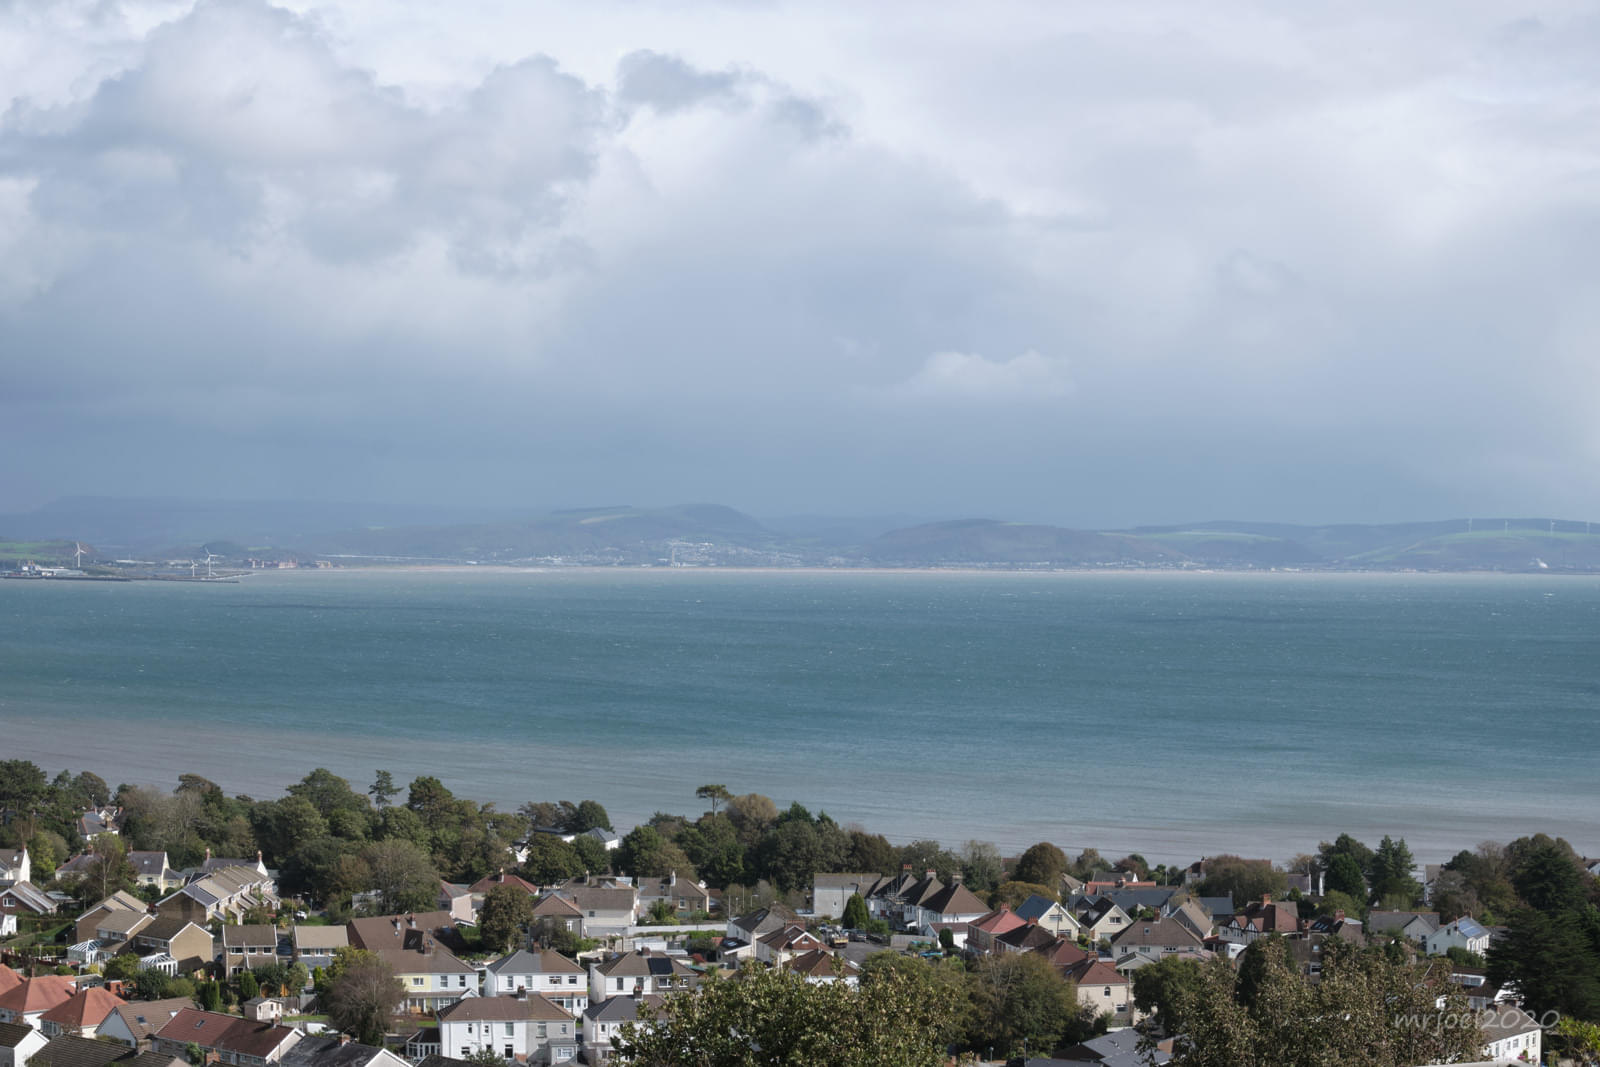 The Mumbles and Swansea Bay Overview